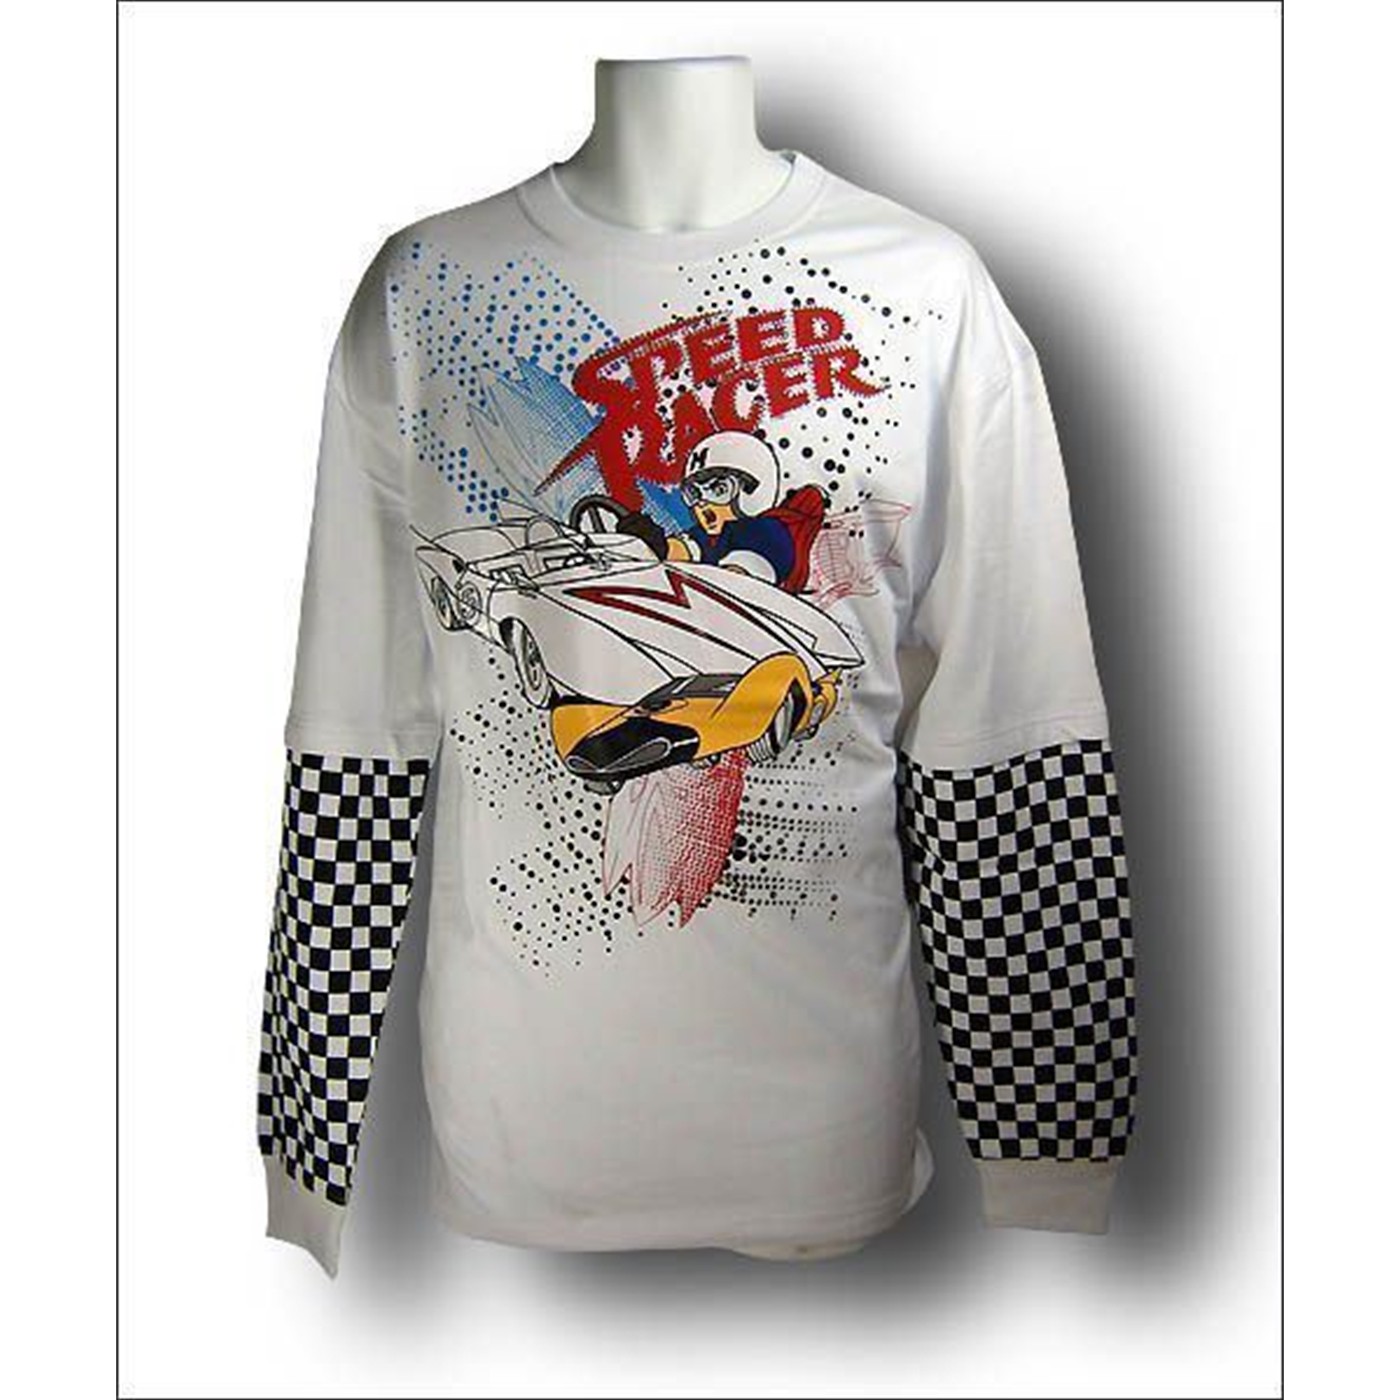 Lot 29 T-Shirts Speed Racer Double T-Shirt. 